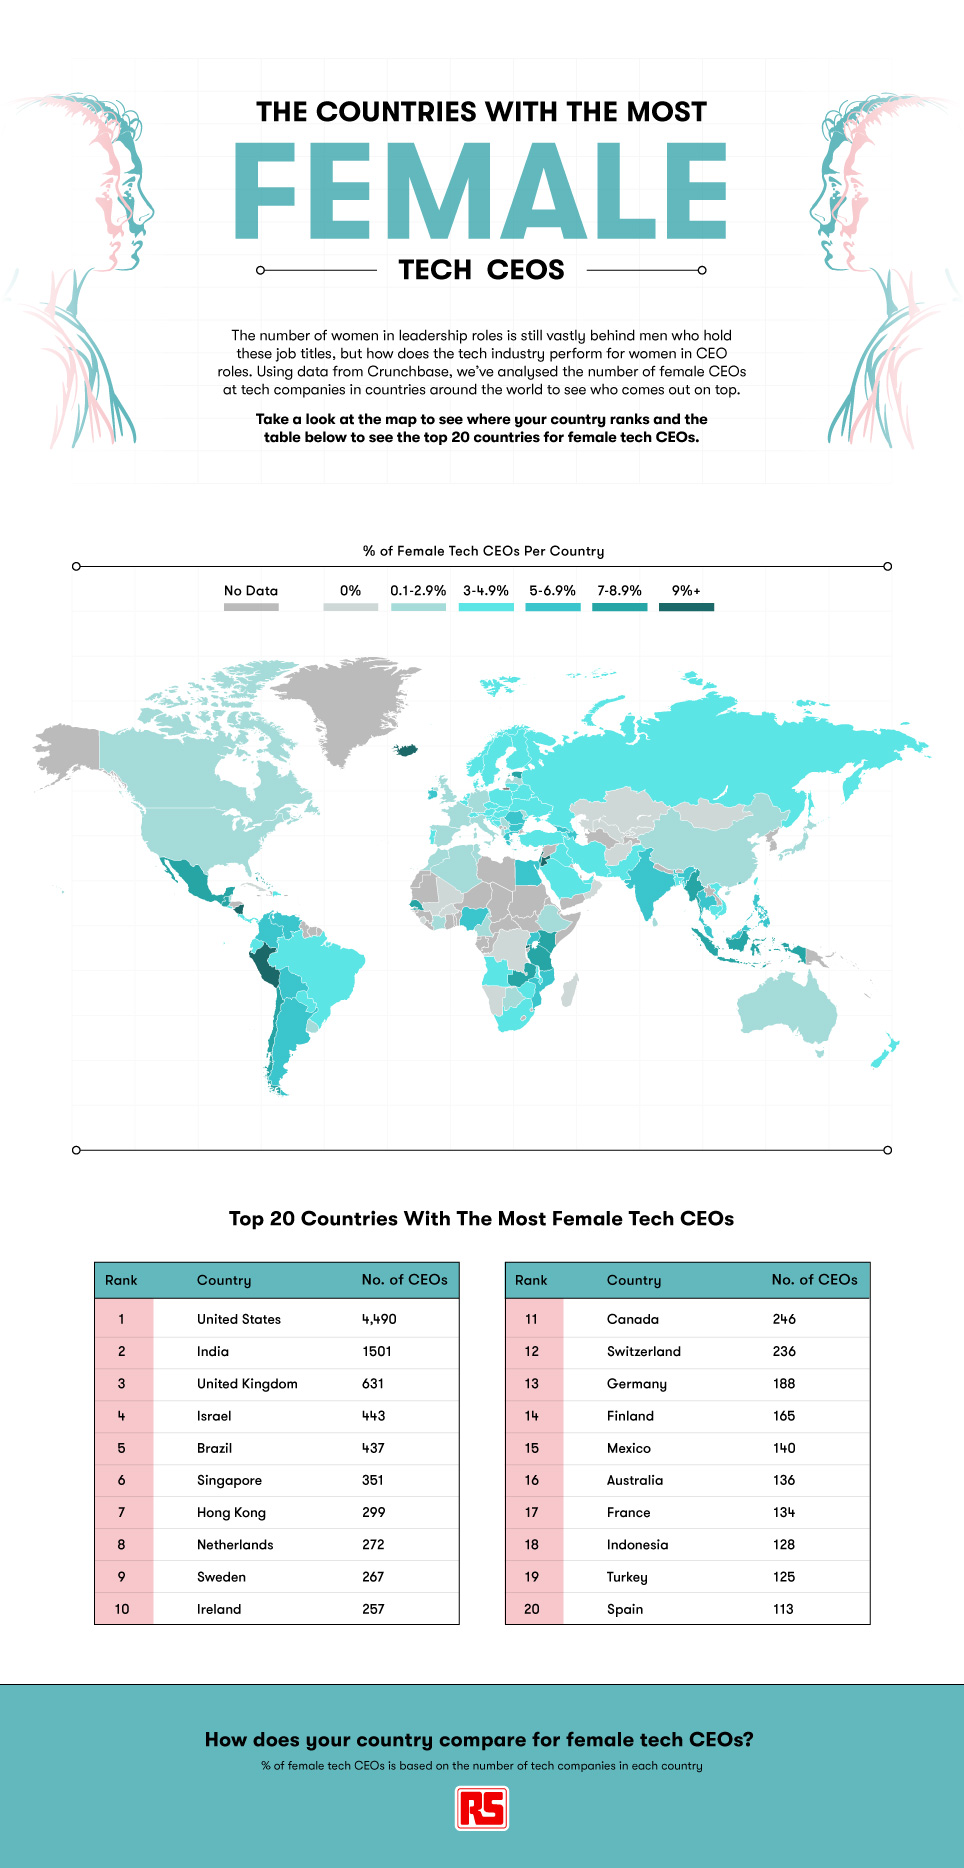 The Countries With The Most Female Tech CEOs infographic